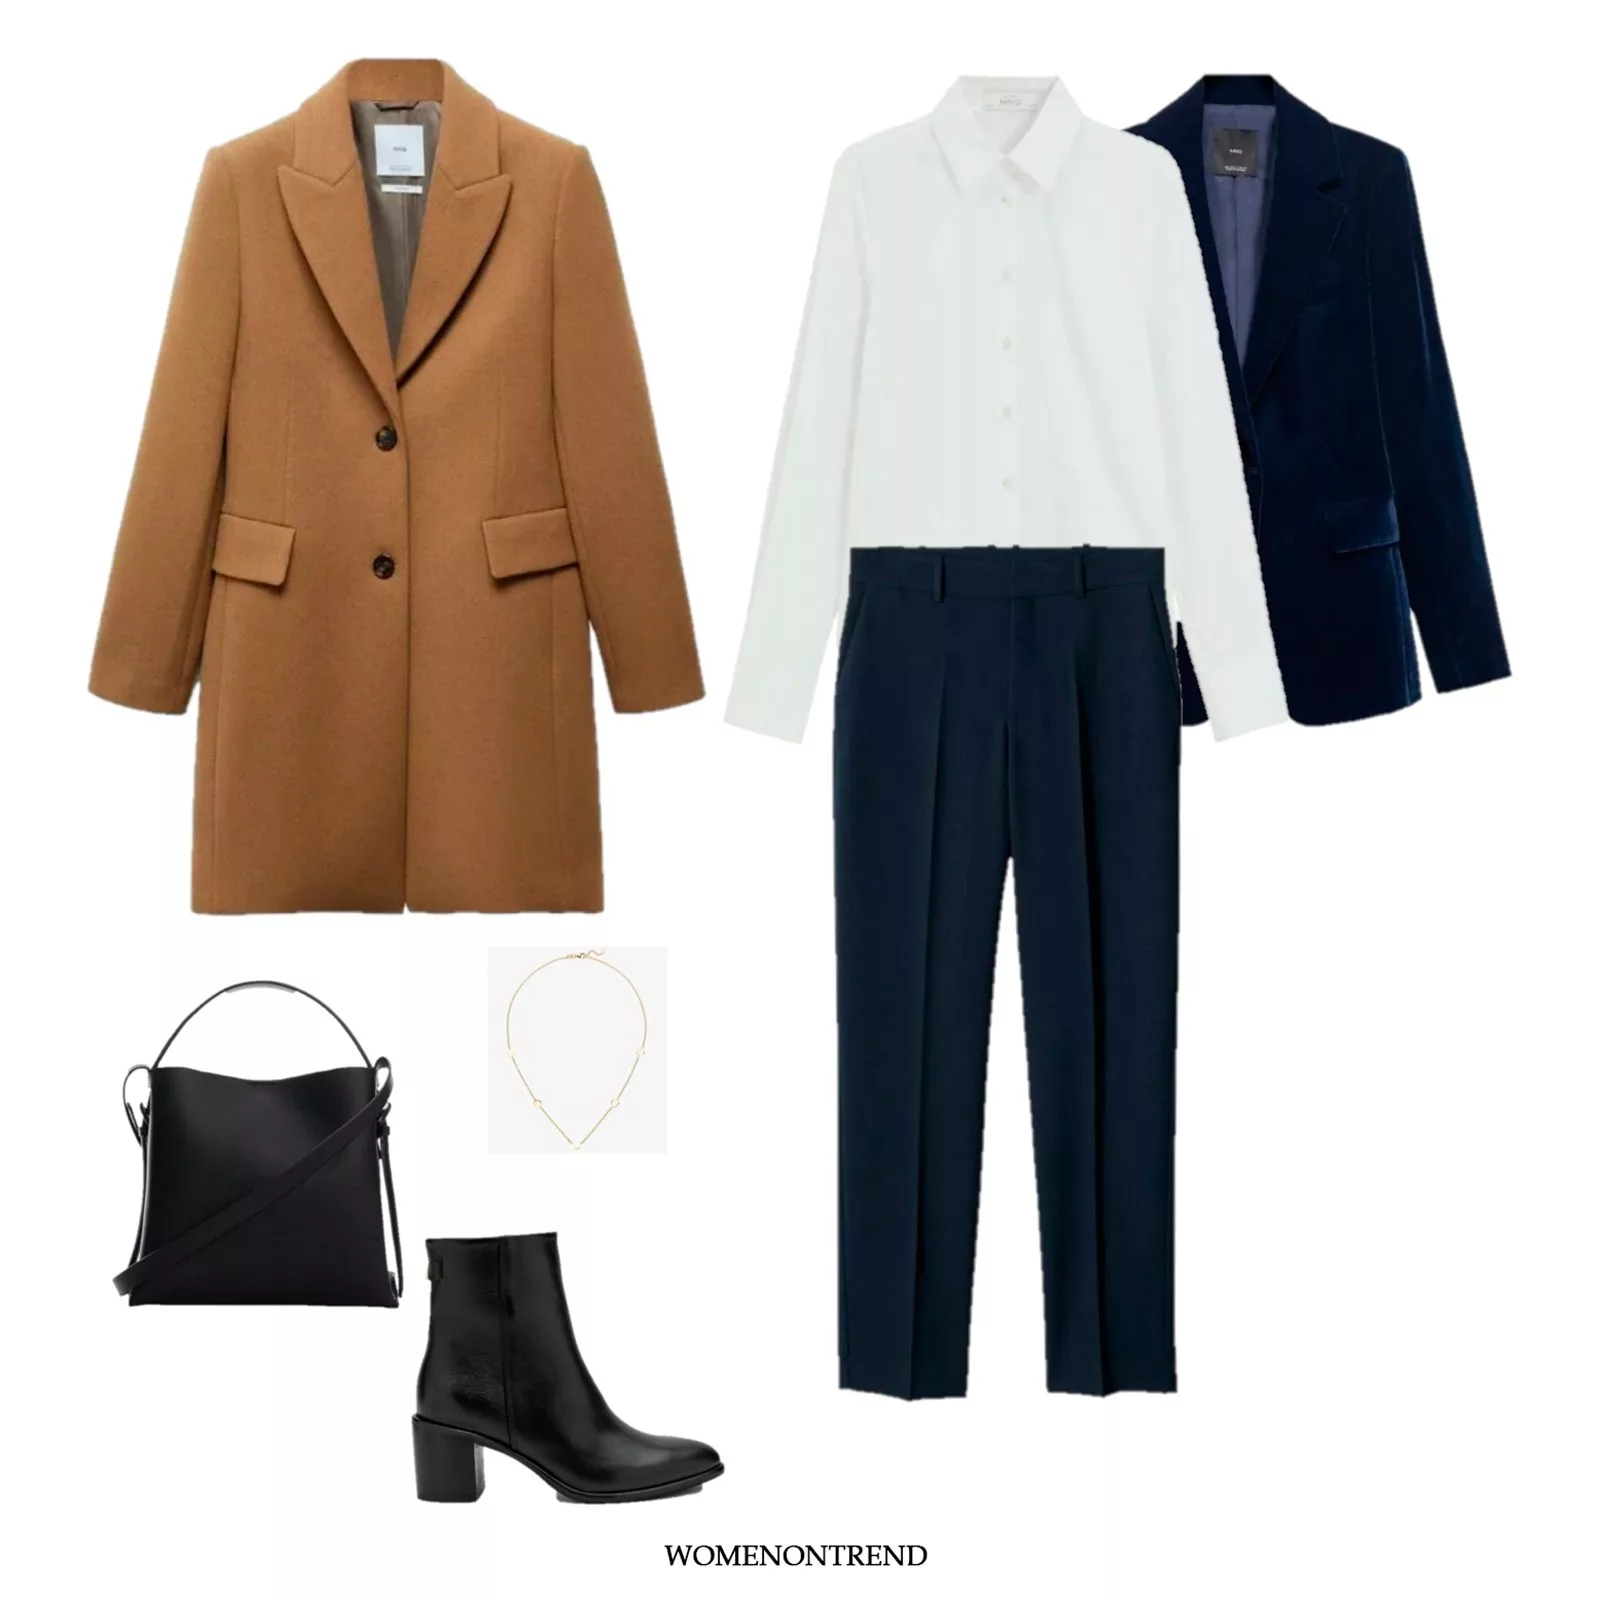 Look 21: Sophisticated Elegance in Navy Blue and Black